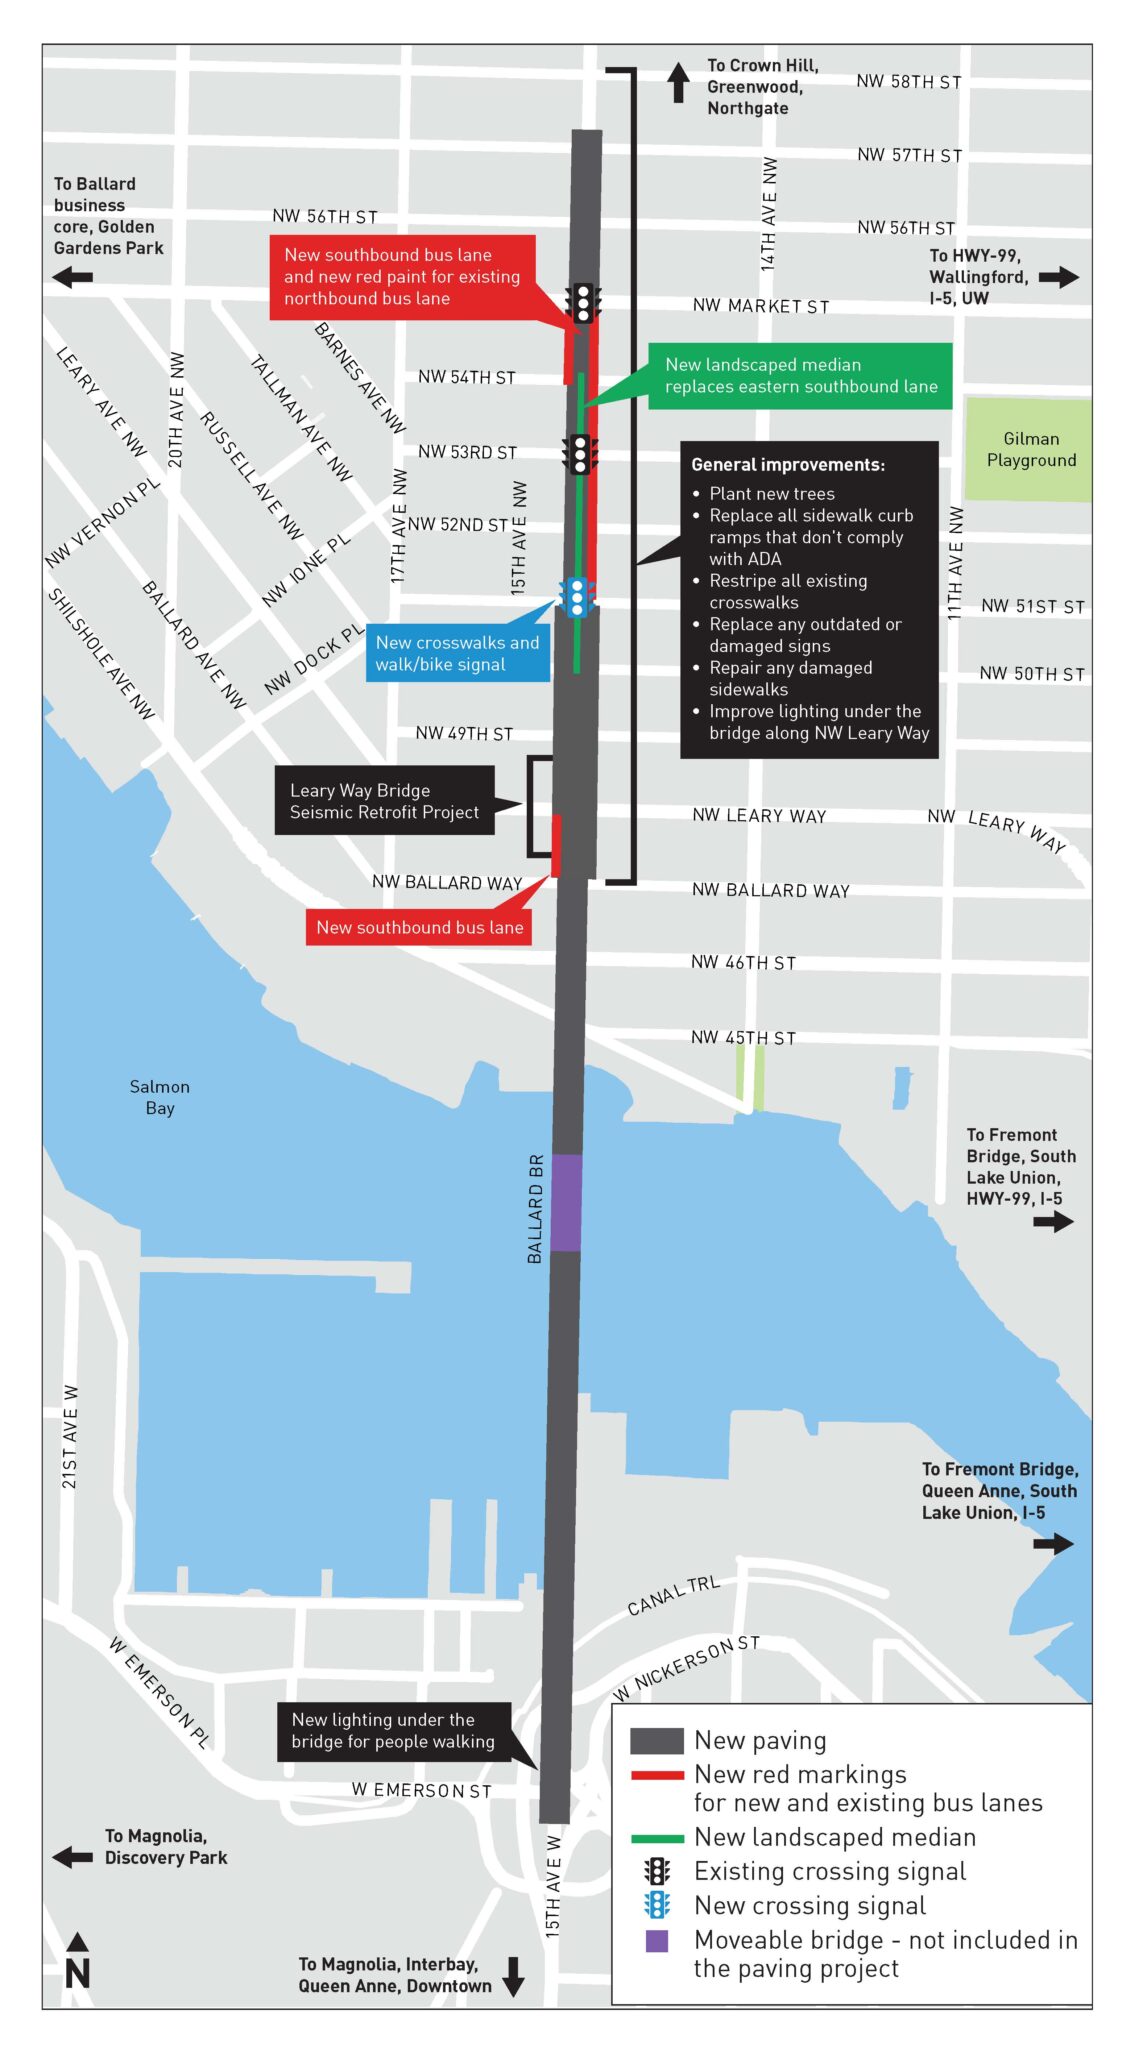 Map describing the project area, including the Ballard Bridge, Ballard neighborhood, and north Interbay neighborhood. Several improvements and changes to crossing signals, medians, bus lanes, and paving are listed on the map.